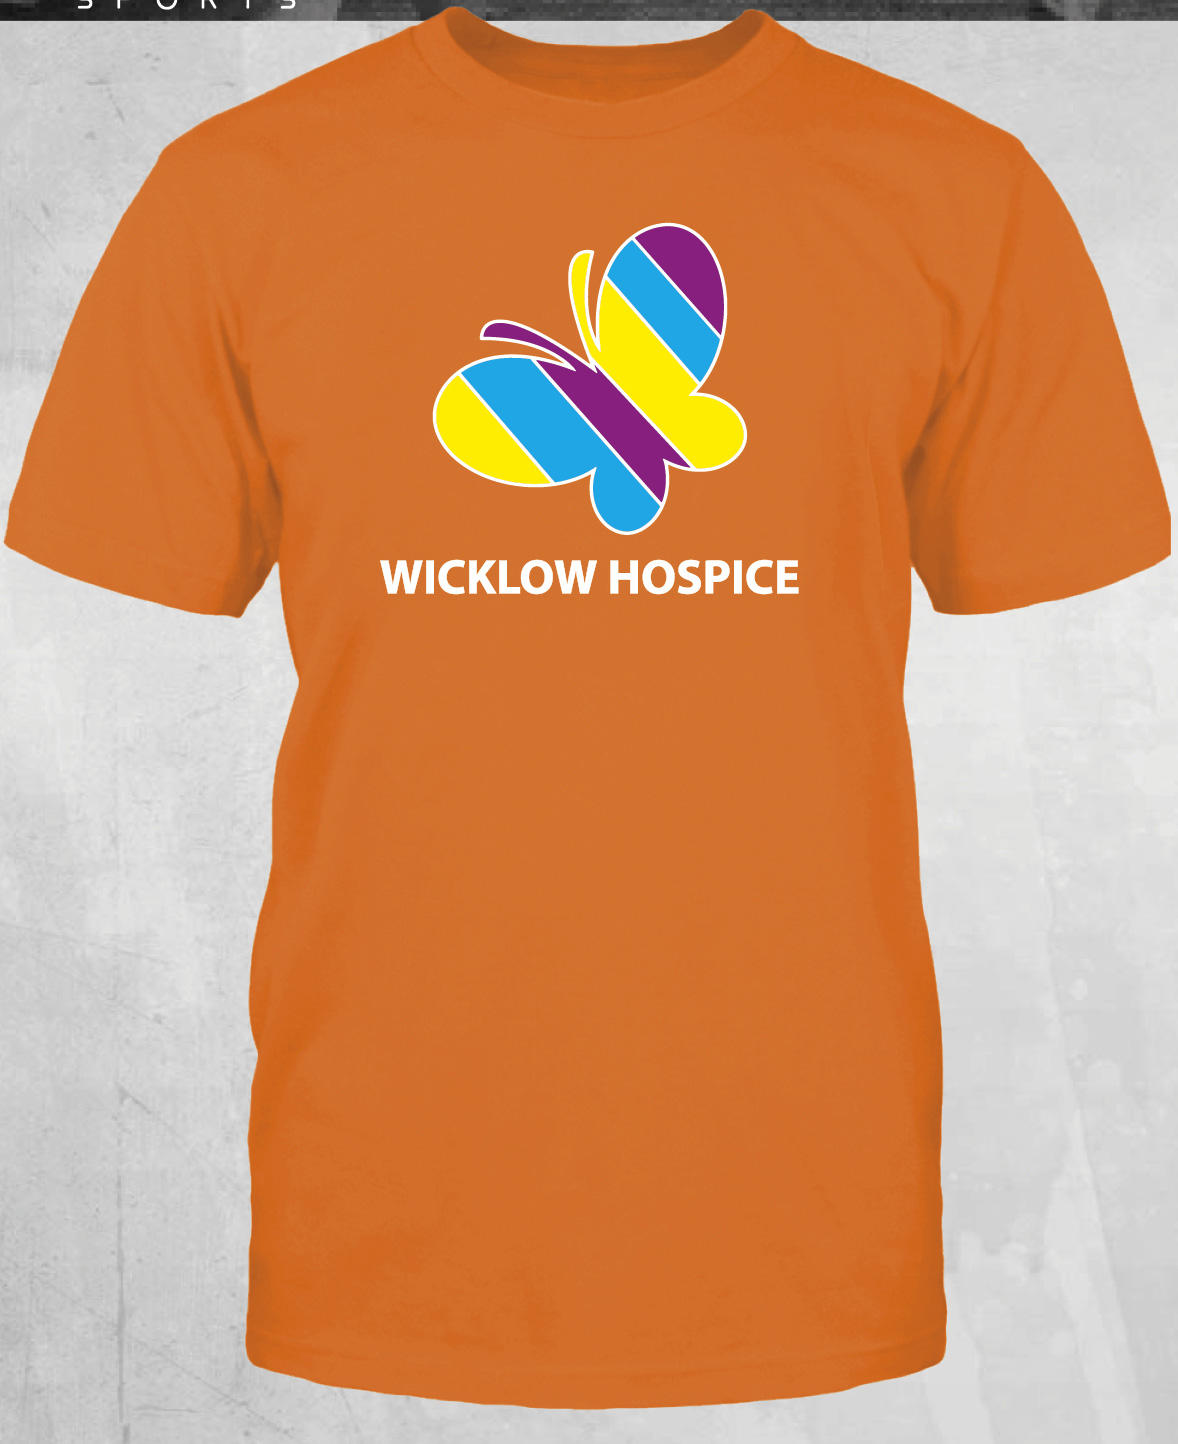 Wicklow T shirt front view